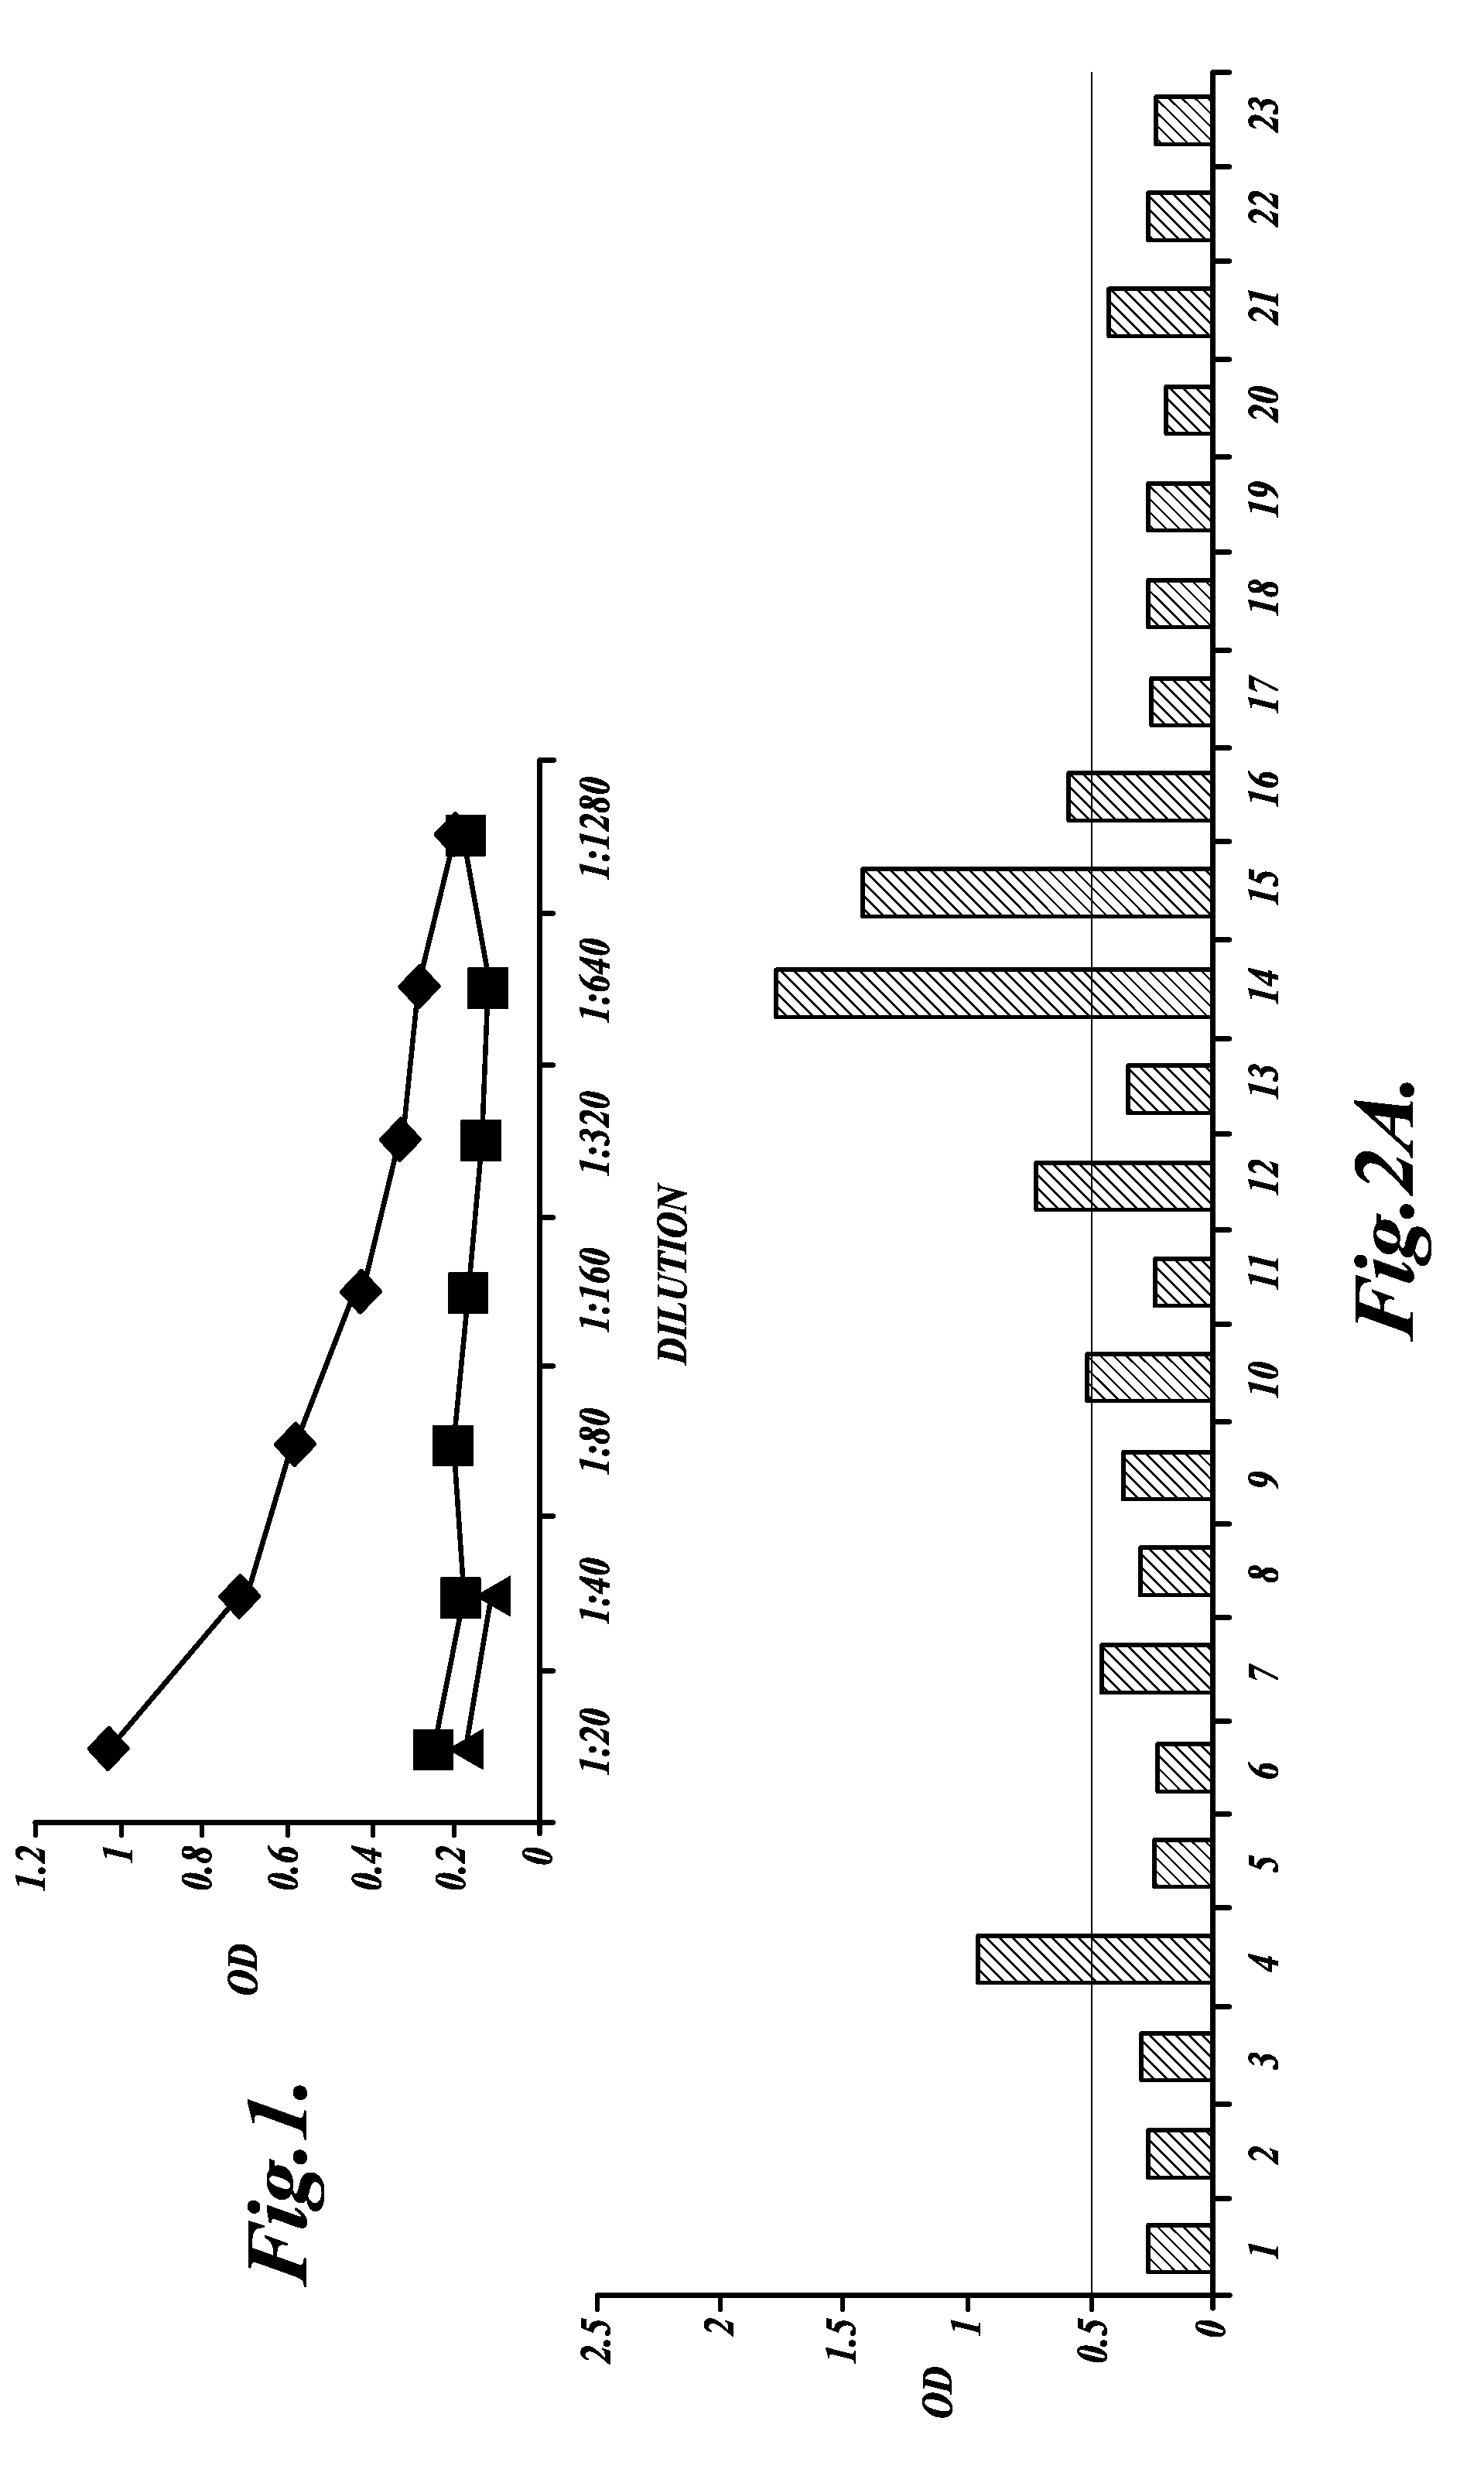 Methods for diagnosis and/or prognosis of ovarian cancer